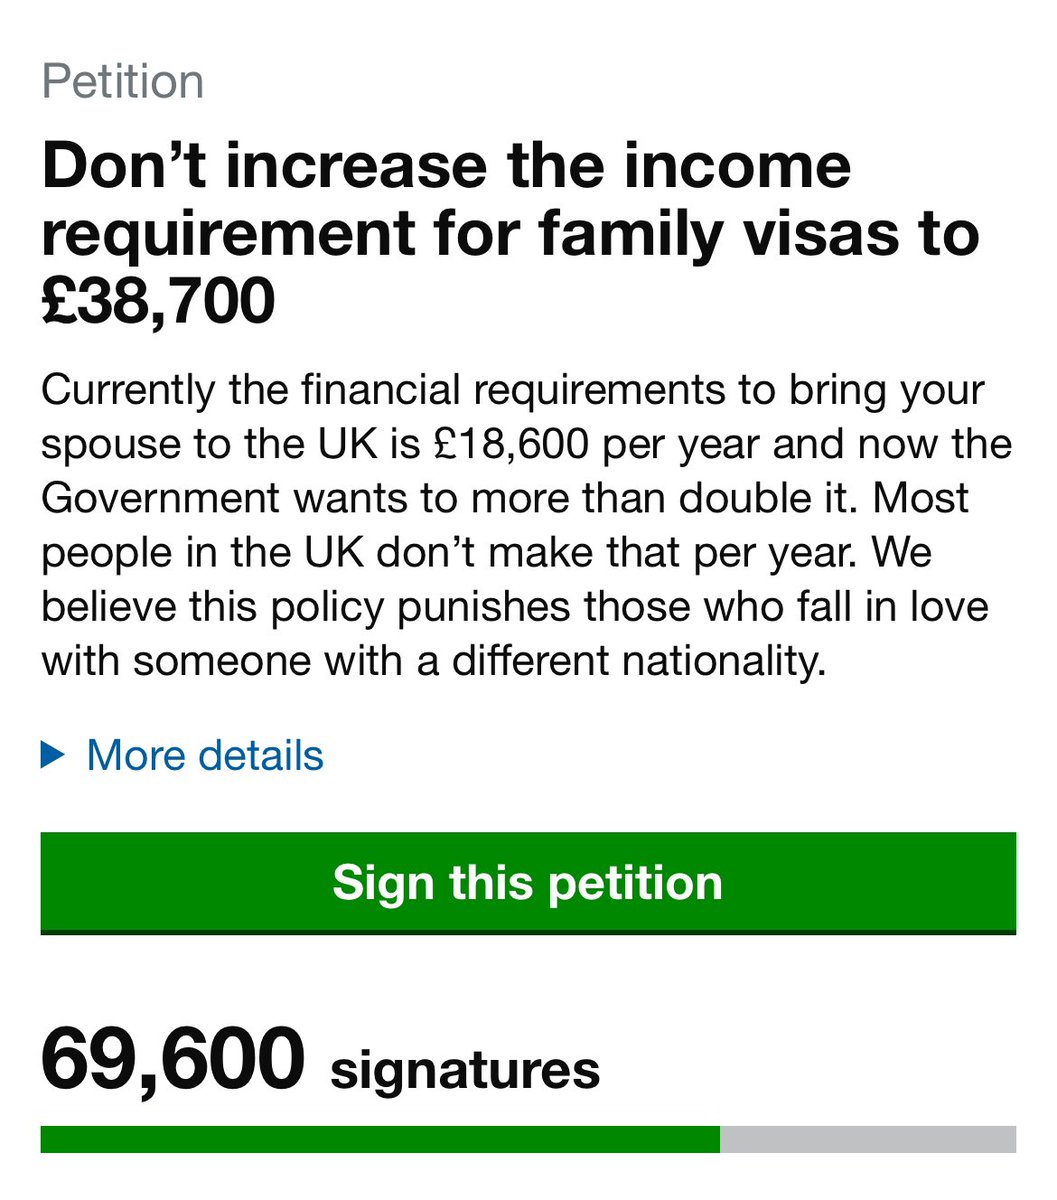 Woke up to this today!! 
Please sign & share for all those children in uk living without their parent despite being a loving family. #ScraptheMIR #ToriesOut629 #Sunakout #StopRacism we need 10k signatures!! petition.parliament.uk/petitions/6526…